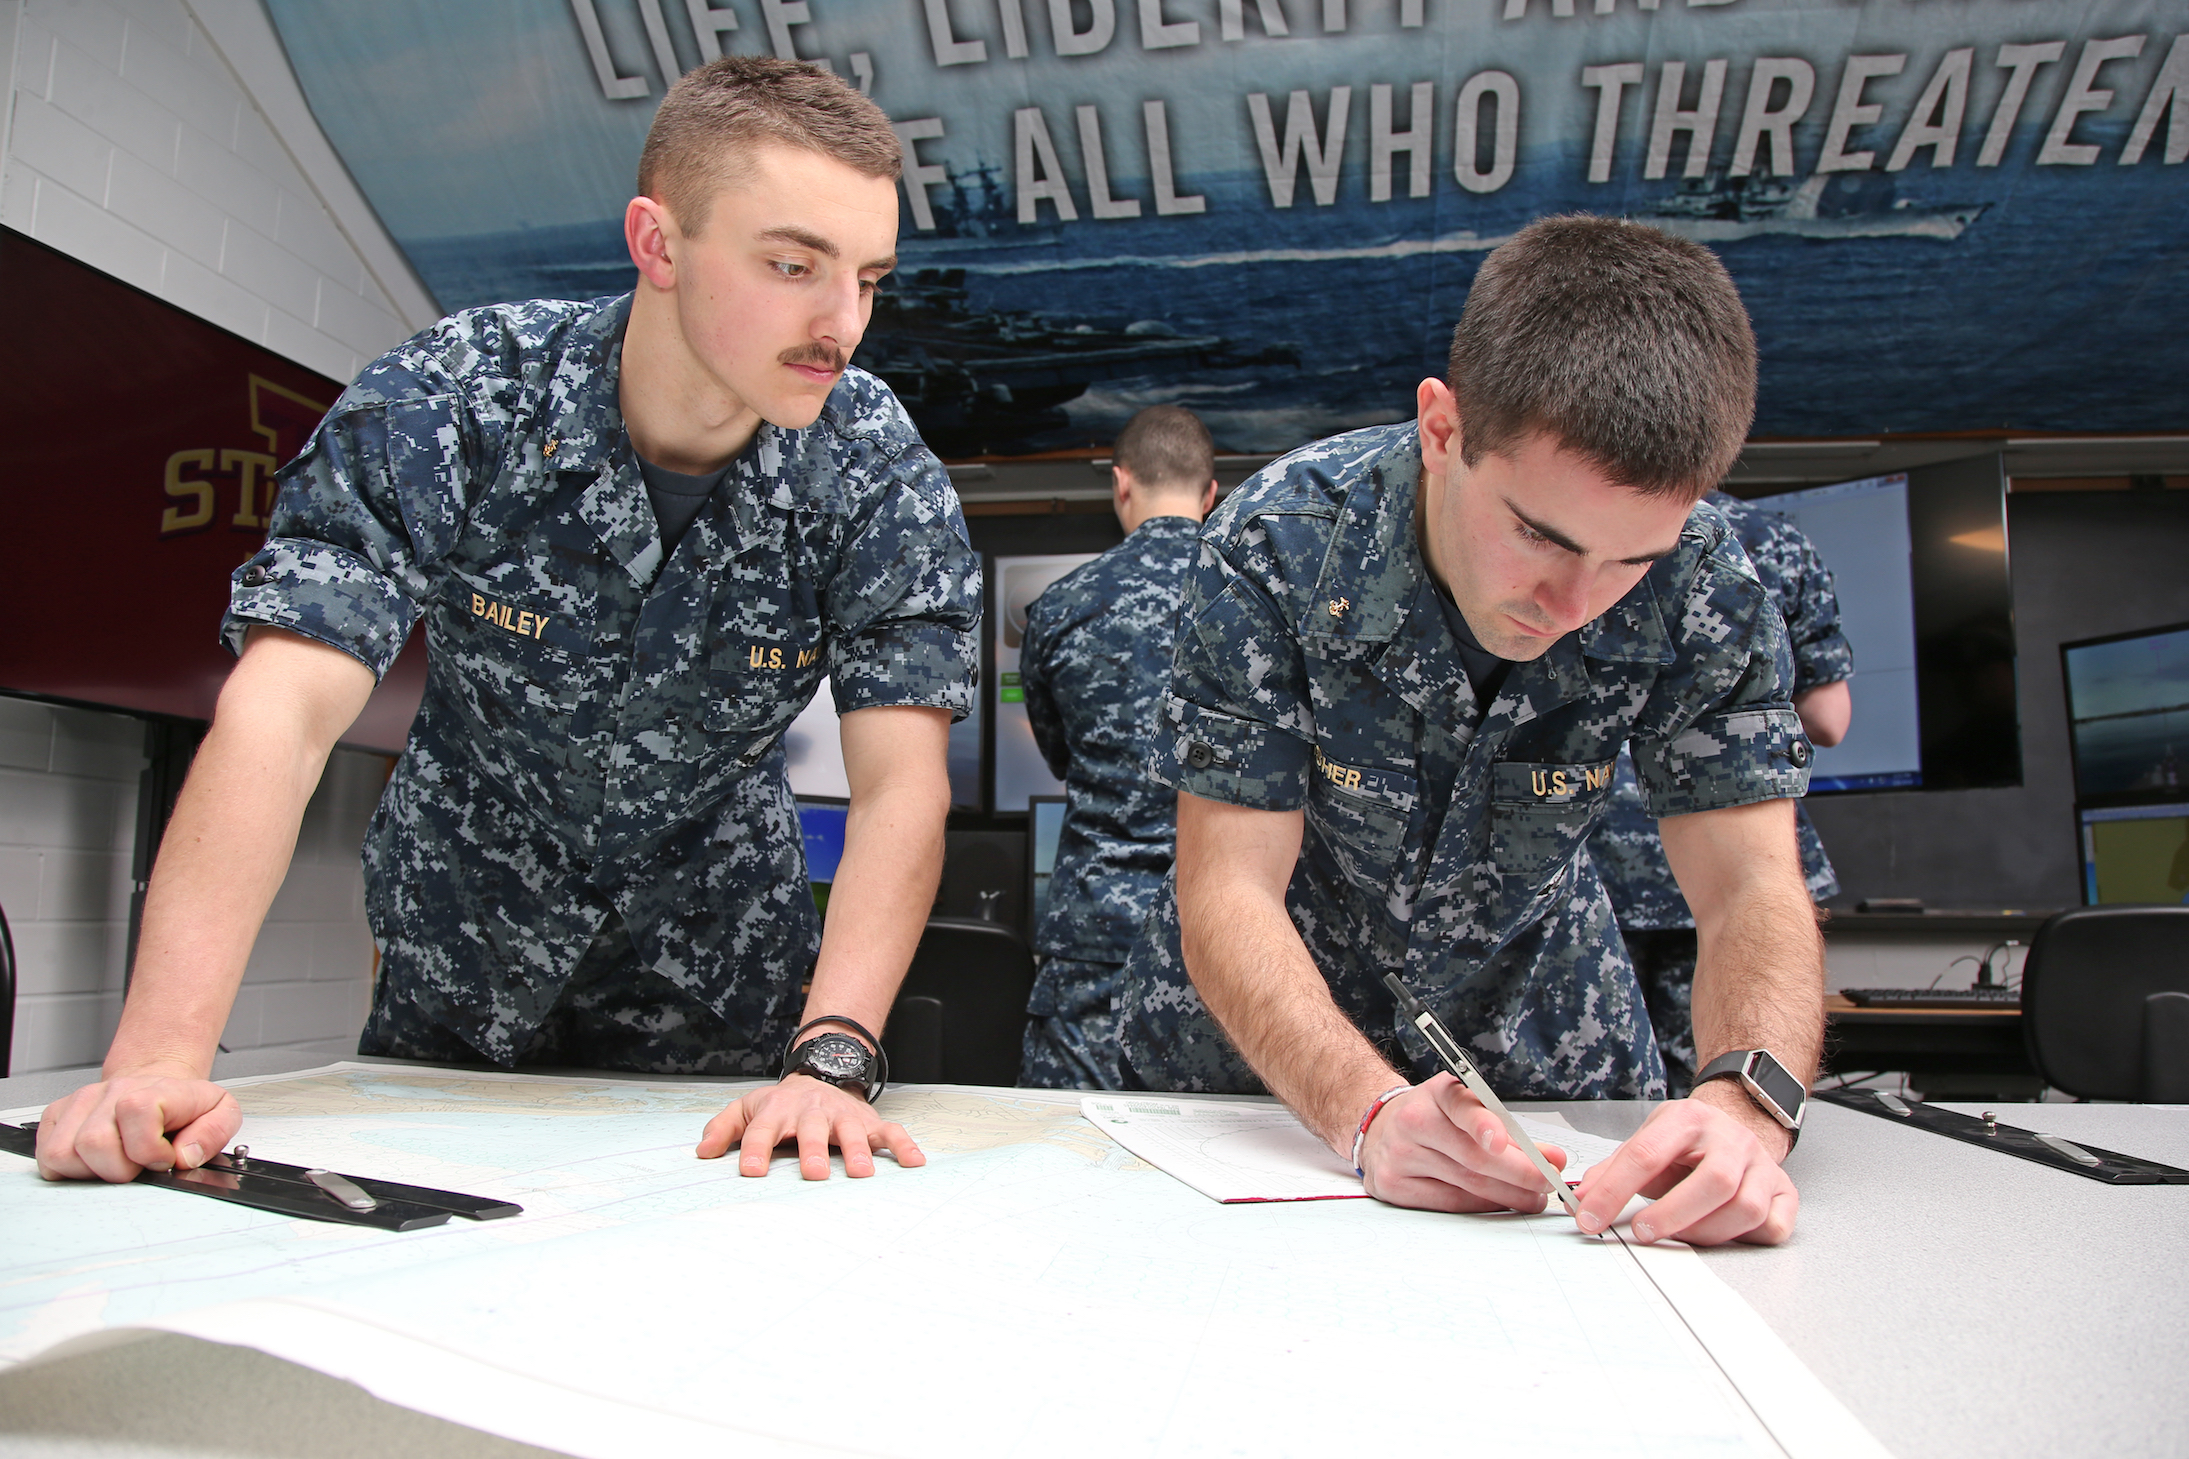 Two Navy ROTC midshipmen practice navigation skills using charts on a table.